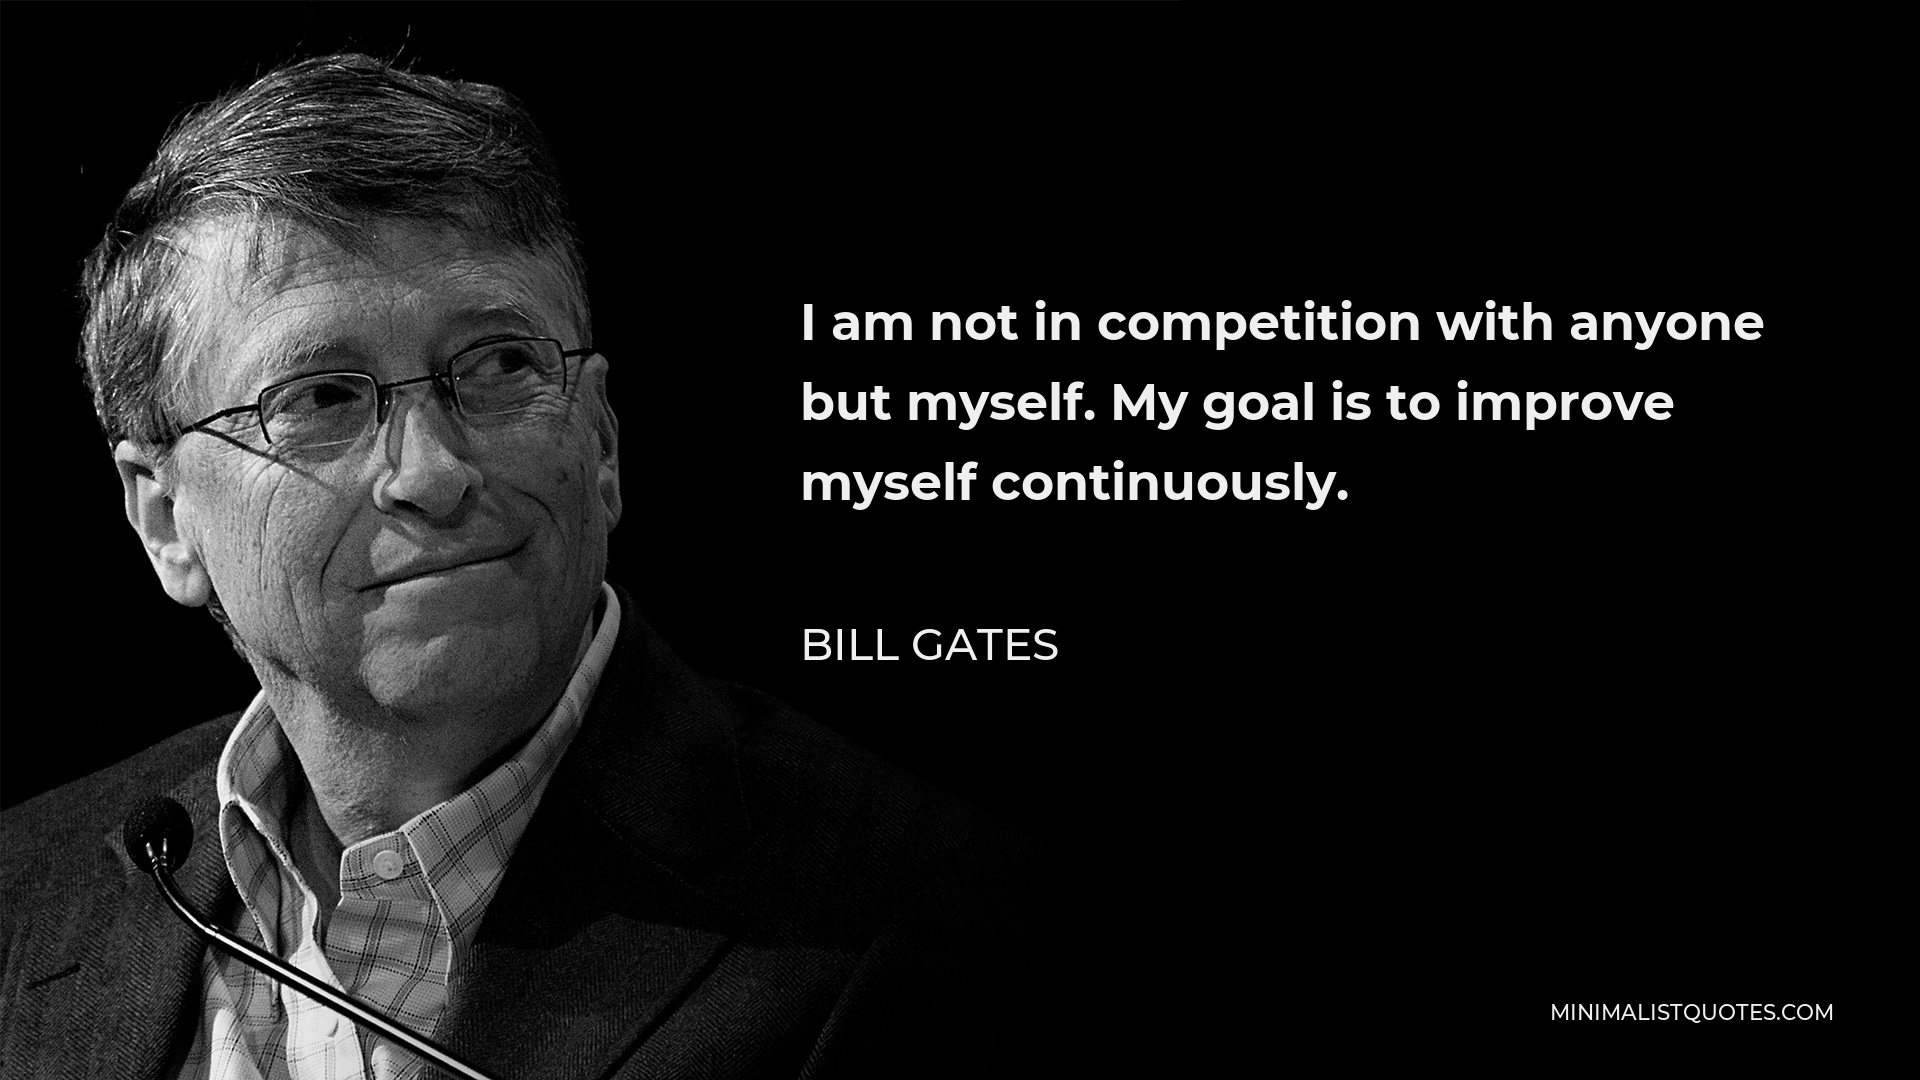 Bill Gates Quote - I am not in competition with anyone but myself. My goal is to improve myself continuously.